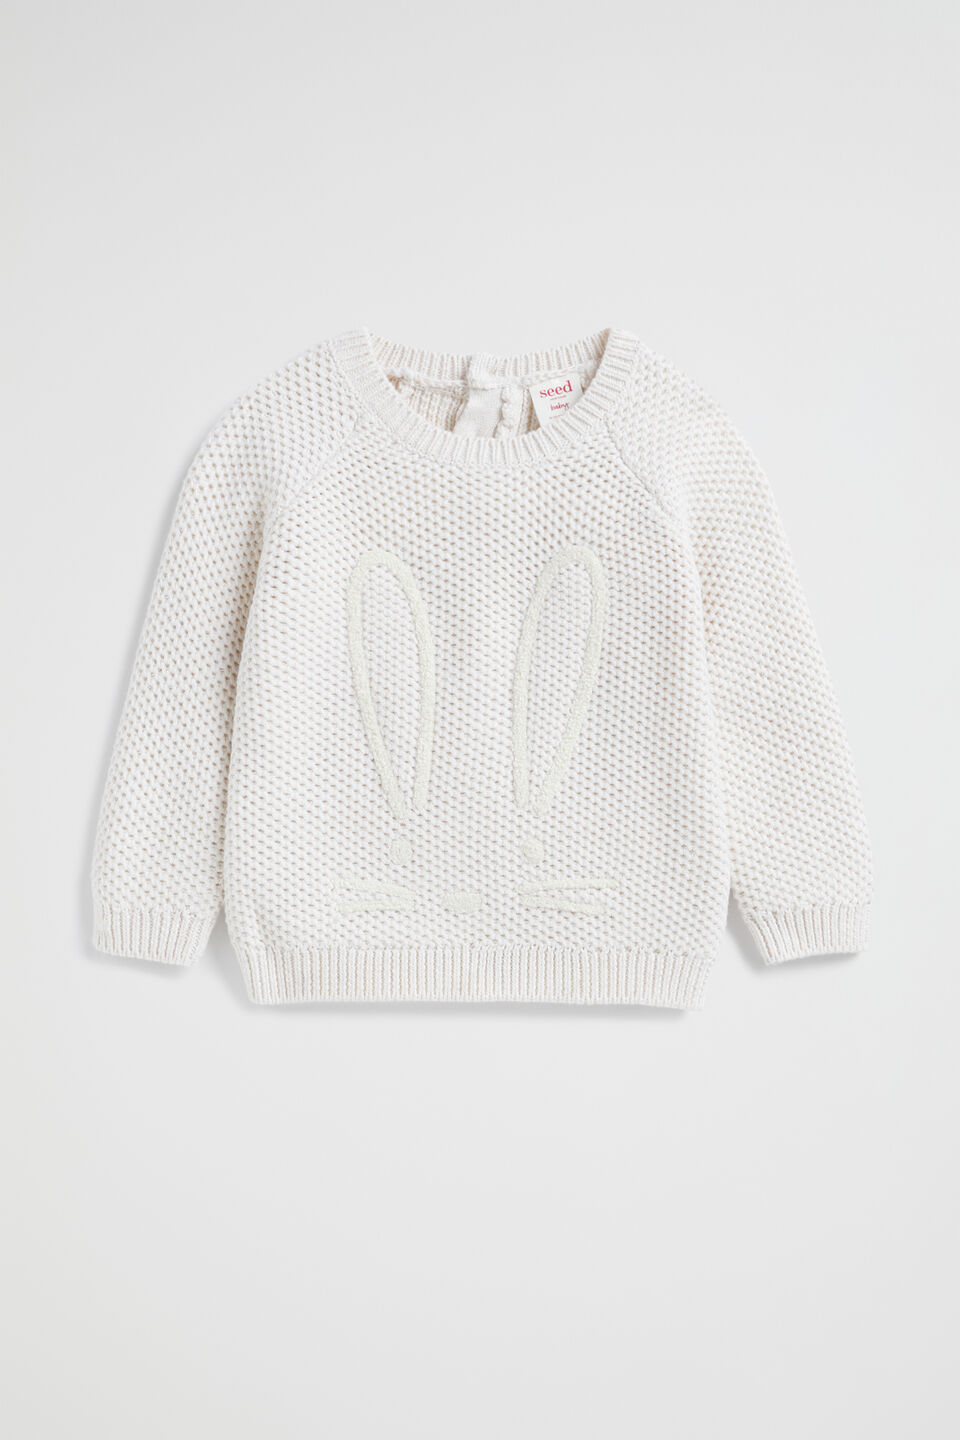 Bunny Knit Sweater  Snow Marle